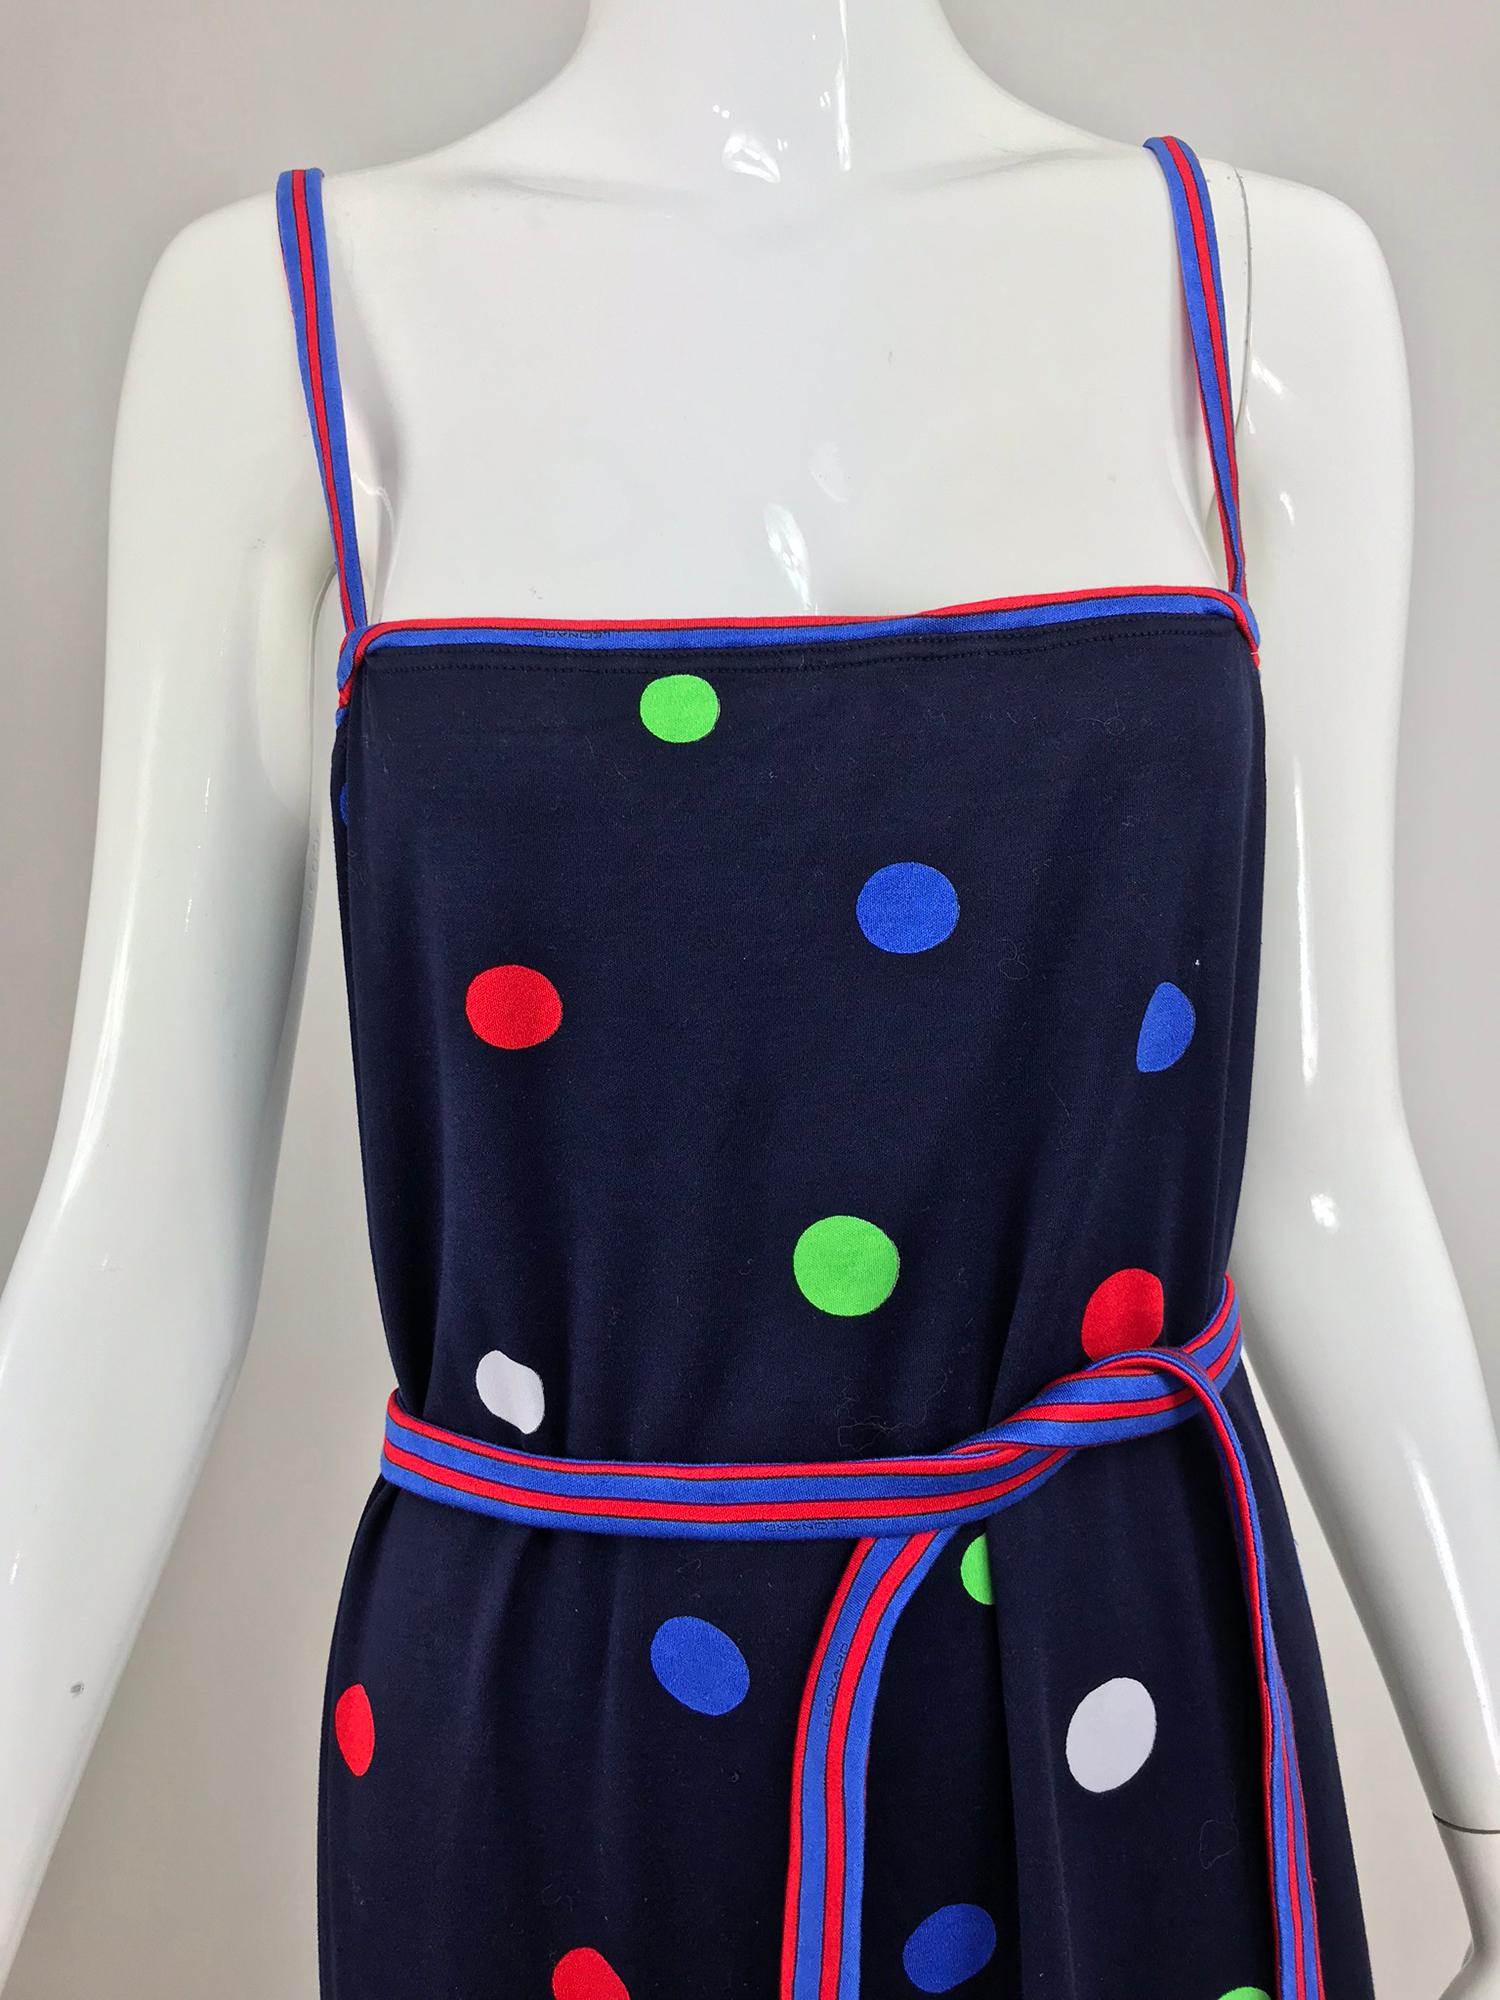 Leonard Paris polka dot cotton knit sun dress from the 1980s. The perfect dress for sunny days, Cotton knit dress in dark dark blue with bright polka dots scattered throughout. Pull on dress has cased elastic at the bodice upper edge, narrow